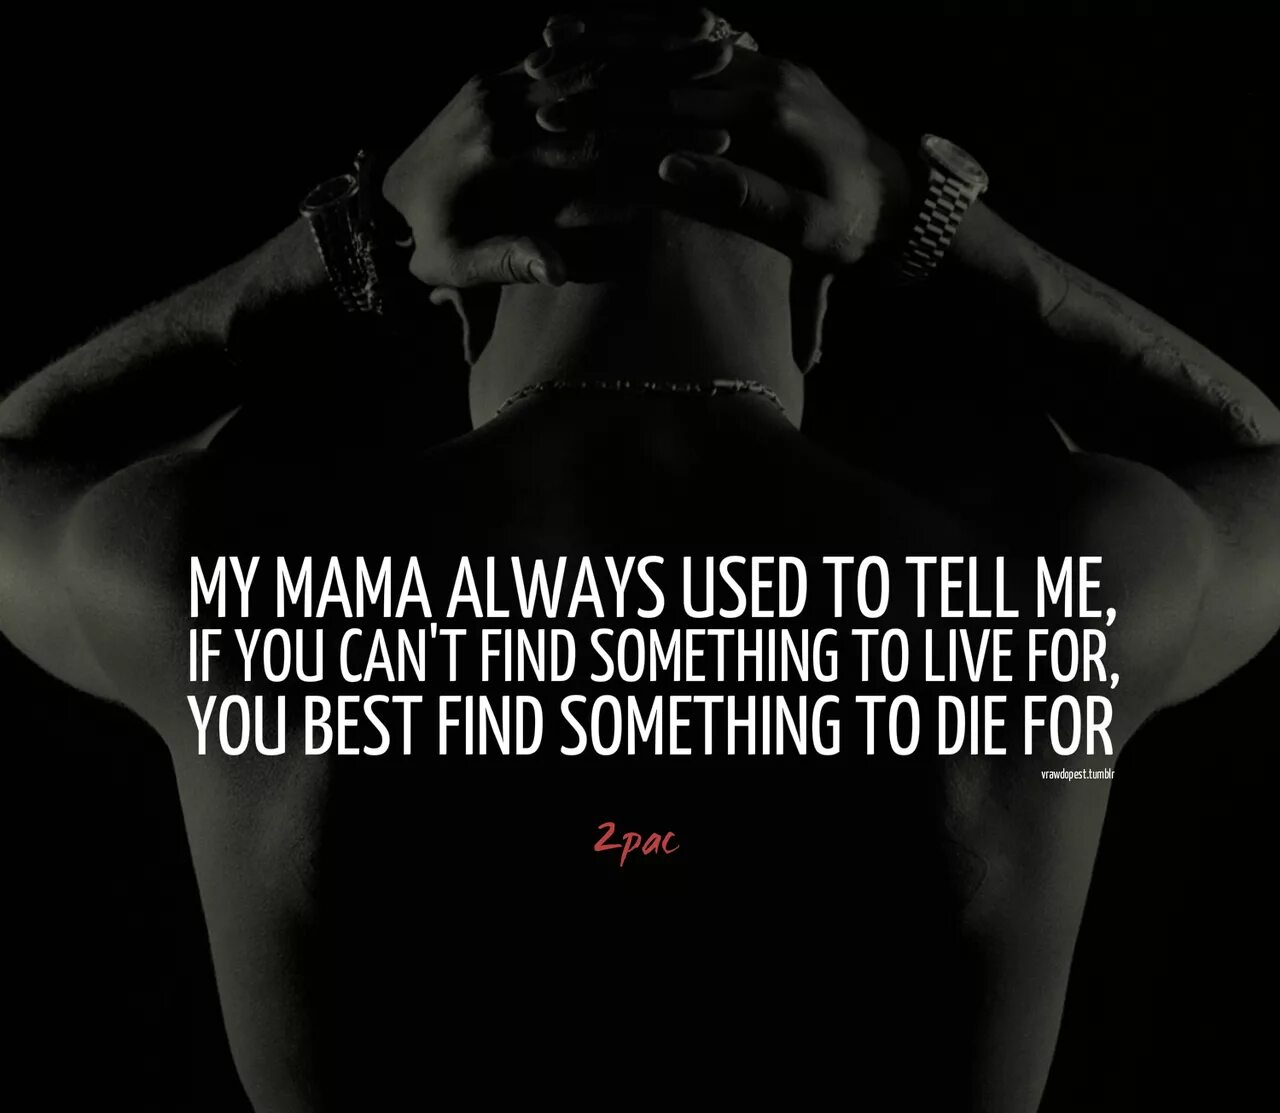 To find something better. 2pac цитаты. Used to always. Find something. Something to Live for.